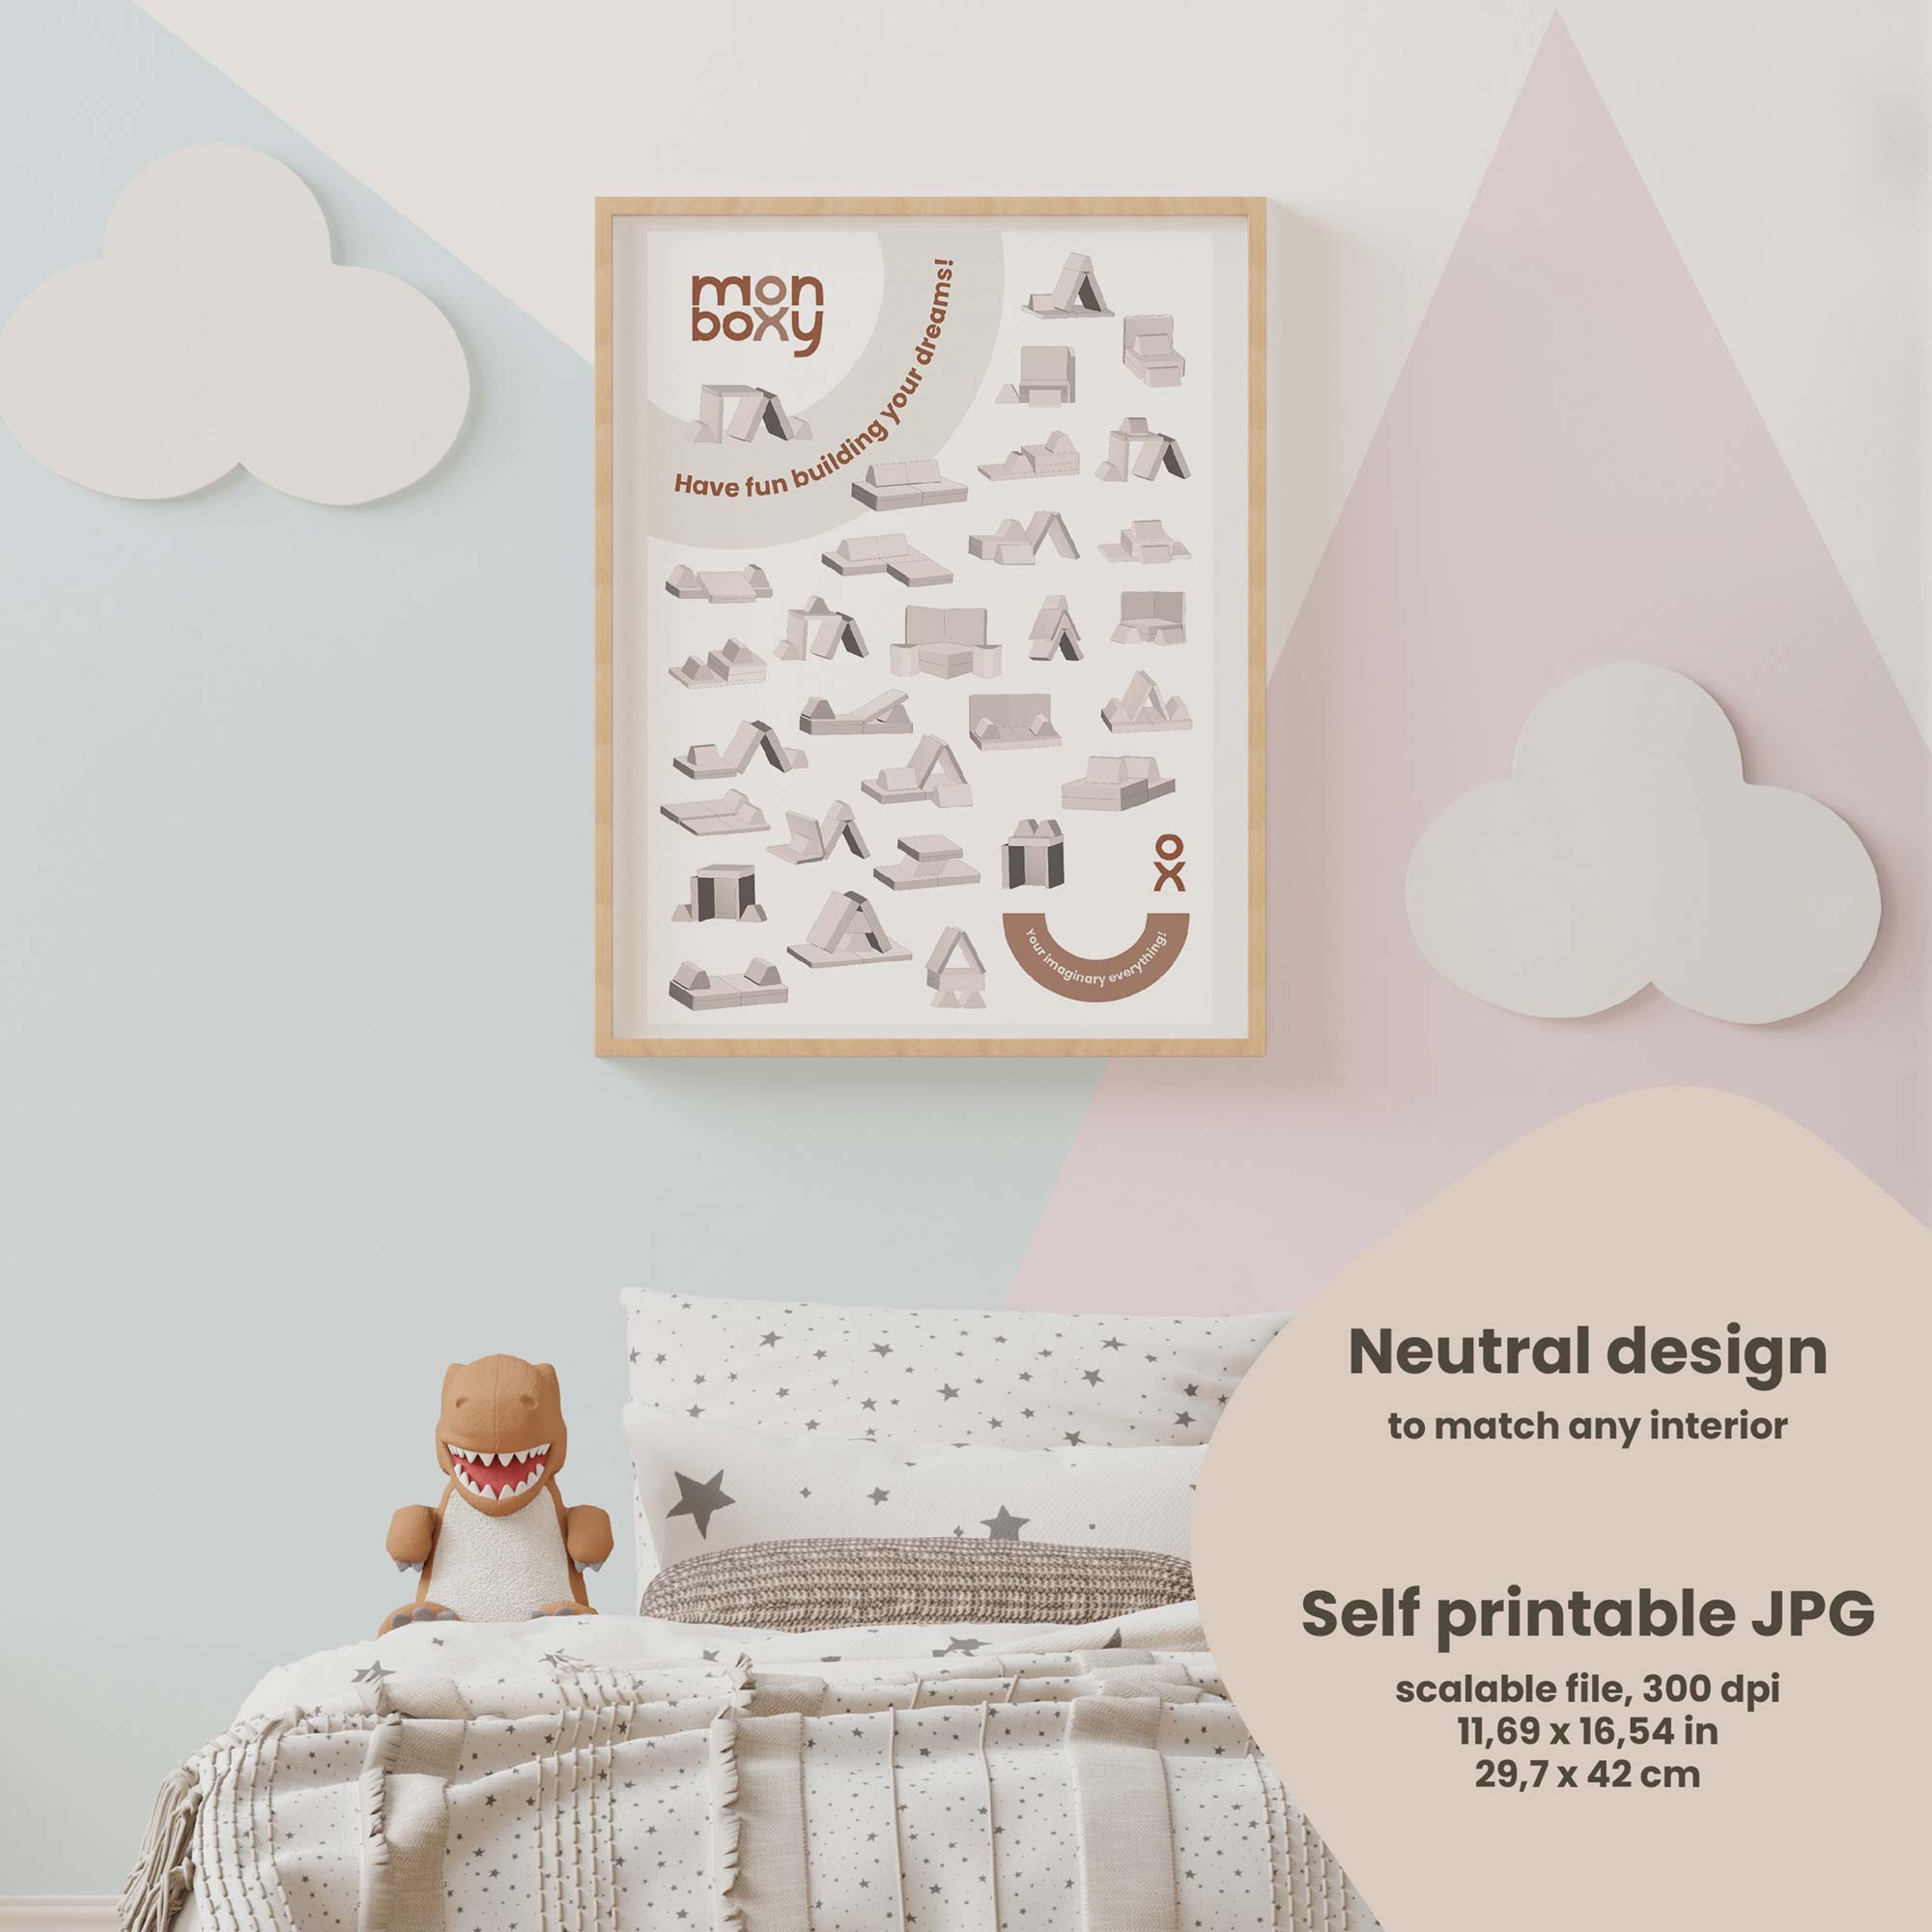 Natural design digital poster of spielsofa build ideas to match any interior. Self printable JPG